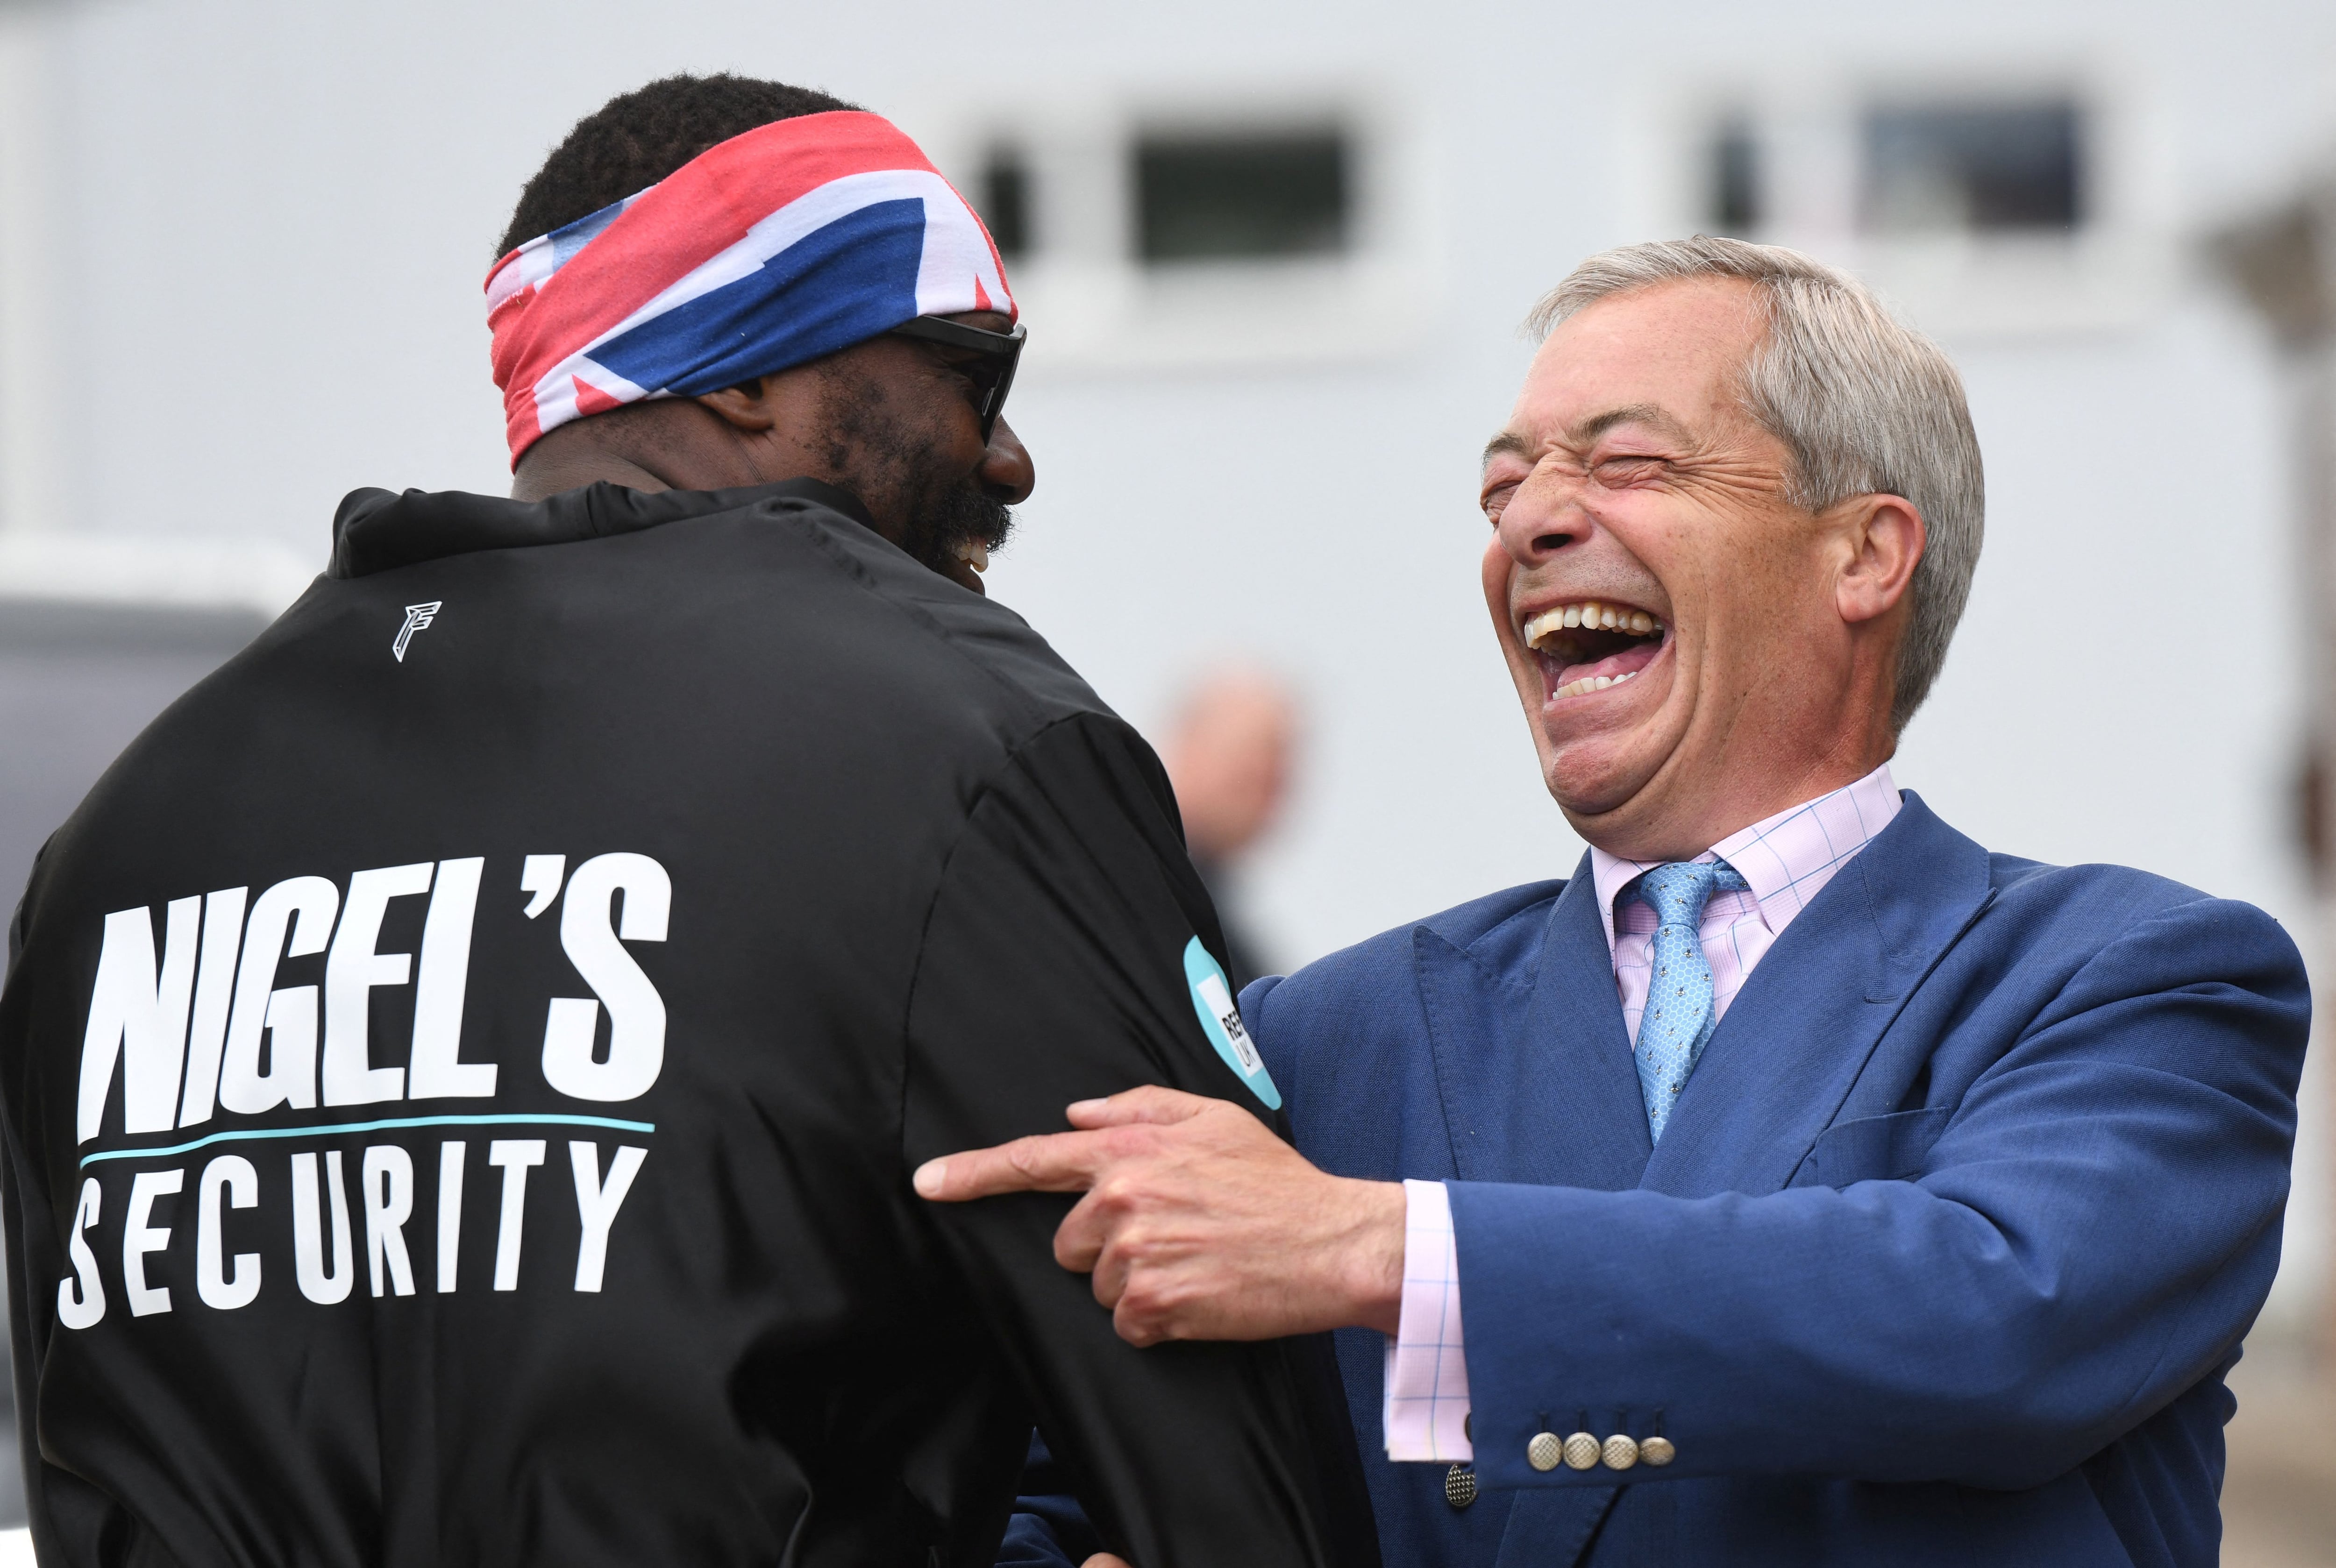 Britain's Reform UK Party Leader Nigel Farage poses with heavyweight boxer Derek Chisora, near a boxing gym, during a campaign visit in Clacton, Britain, July 3, 2024. REUTERS/Chris J. Ratcliffe